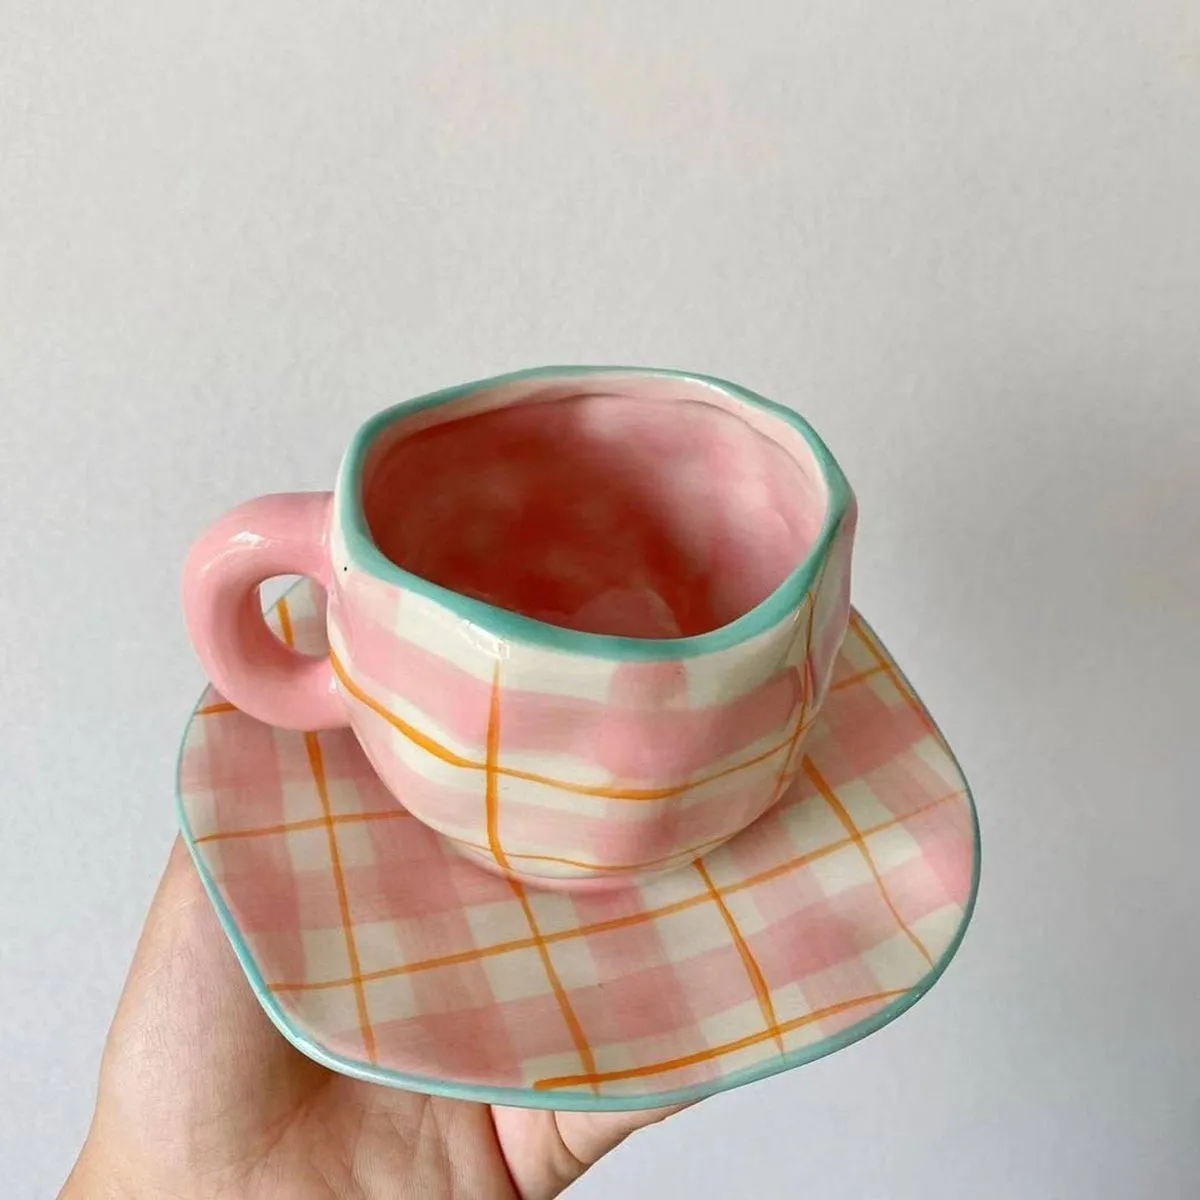 Gingham pottery painting ideas